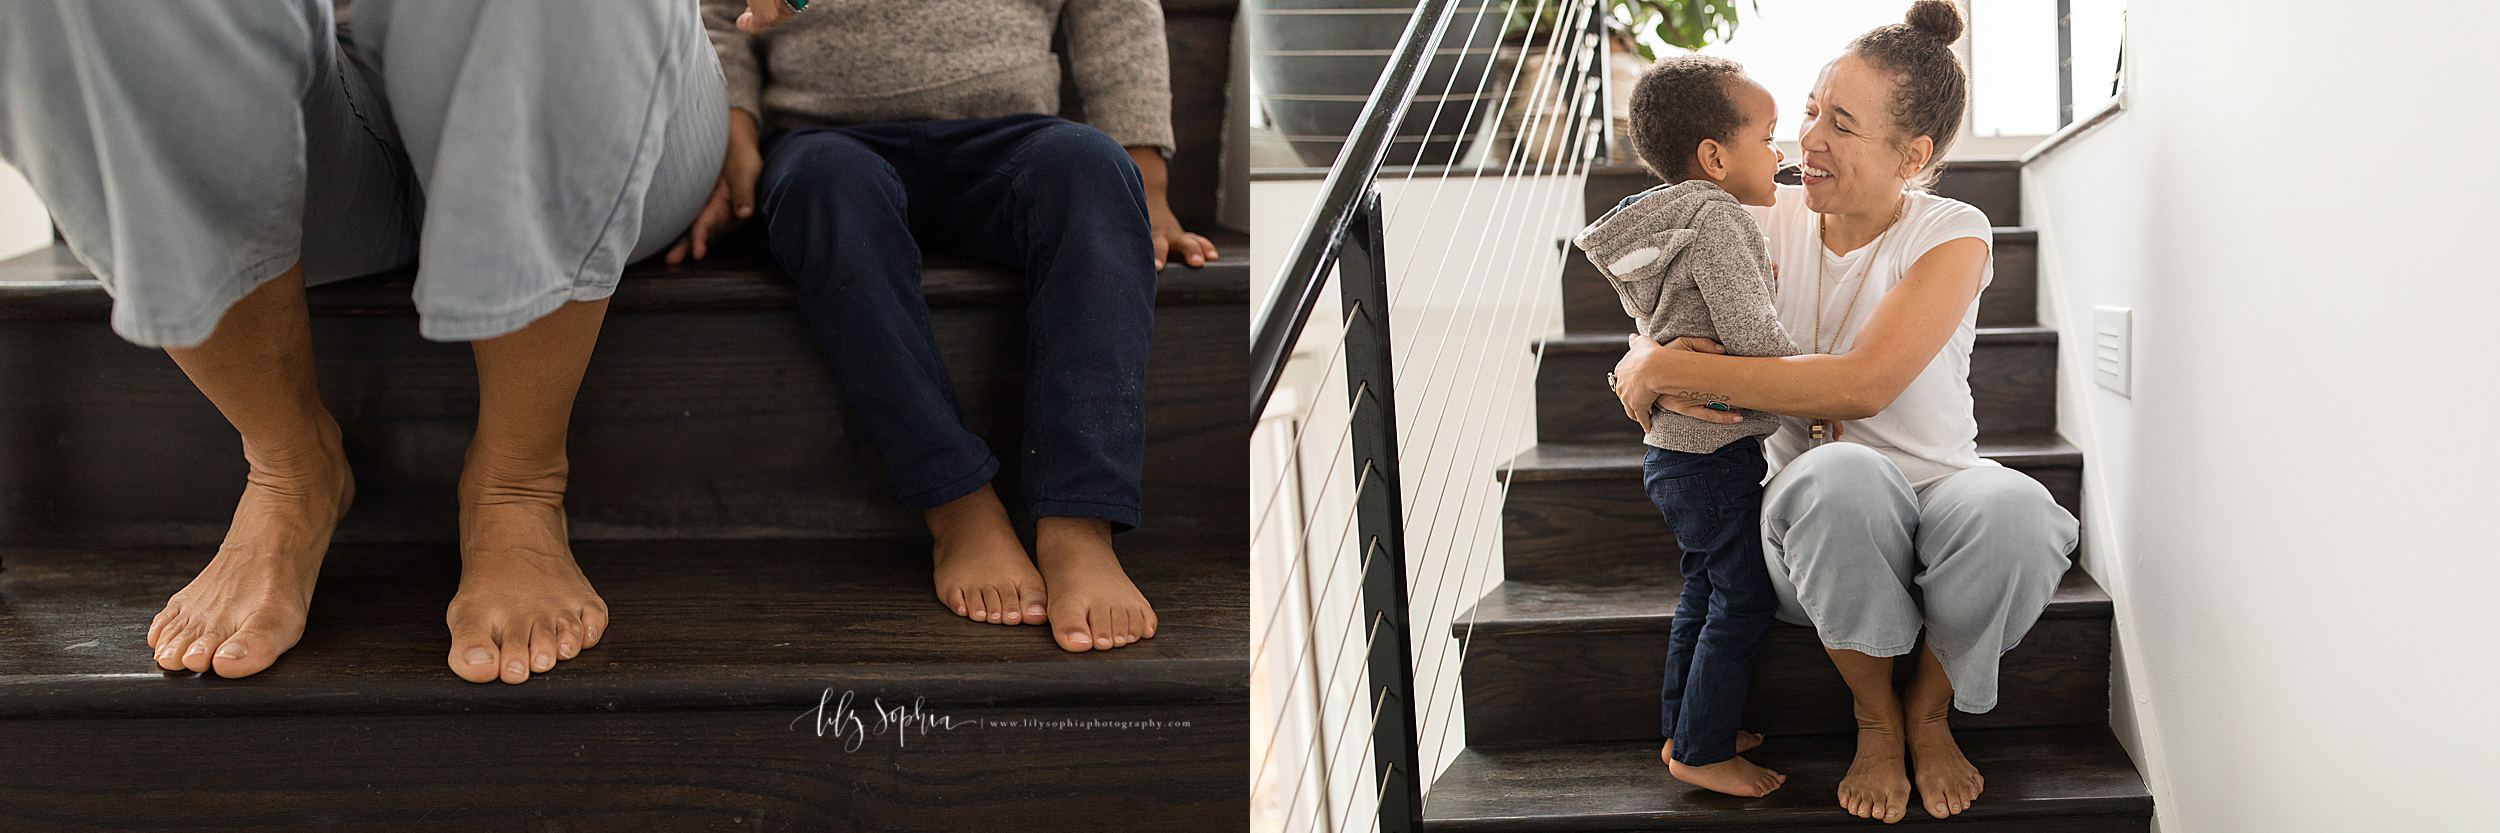 atlanta-midtown-inman-grant-park-beltline-old-fourth-ward-lily-sophia-photography-in-home-lifestyle-mommy-and-me-session-family-photographer-toddler-boy_0417.jpg